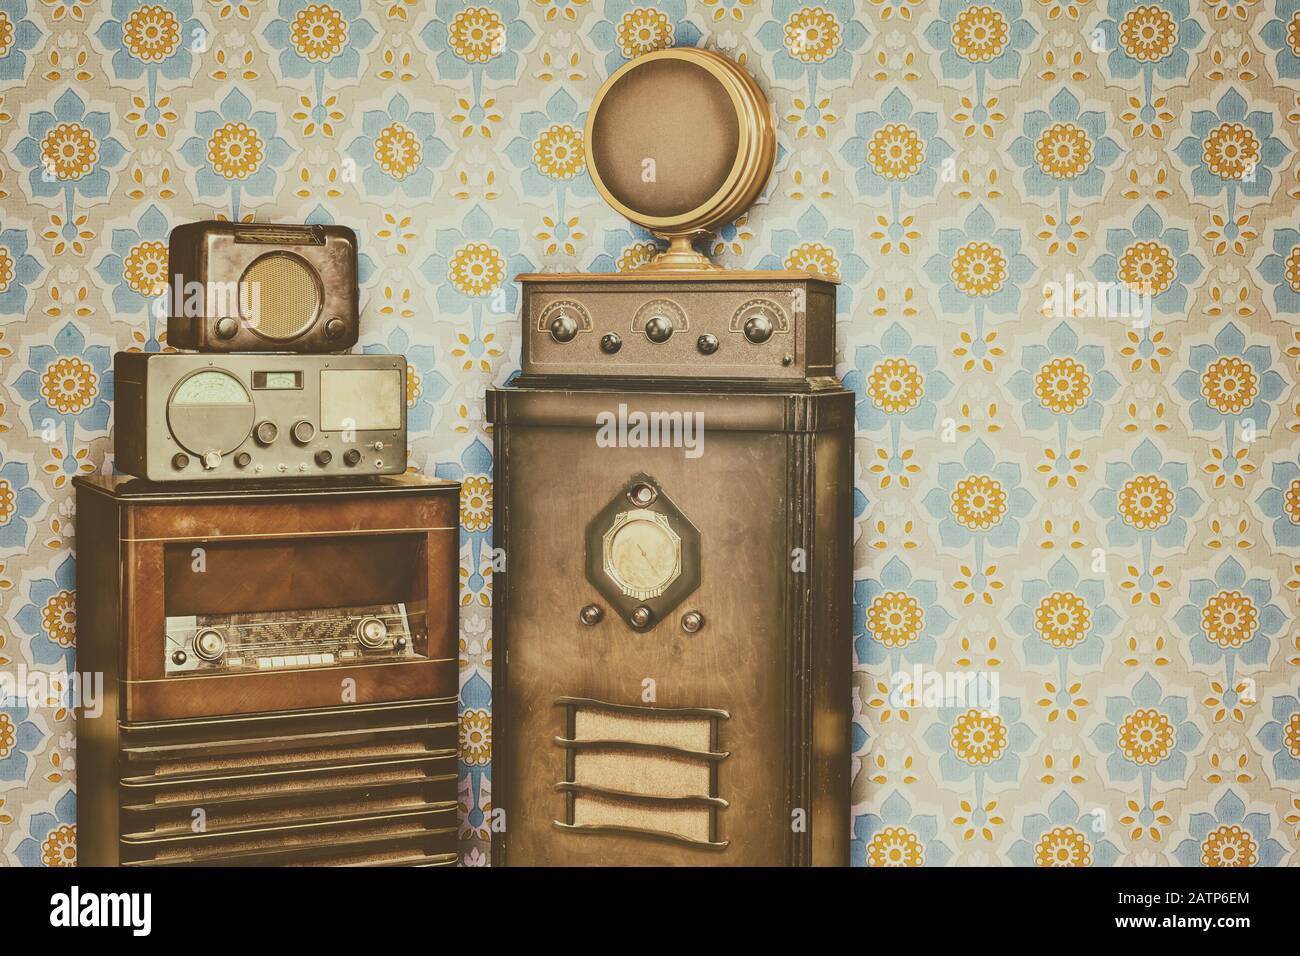 Retro styled image of old radio's in front of a retro wallpaper with flower pattern Stock Photo